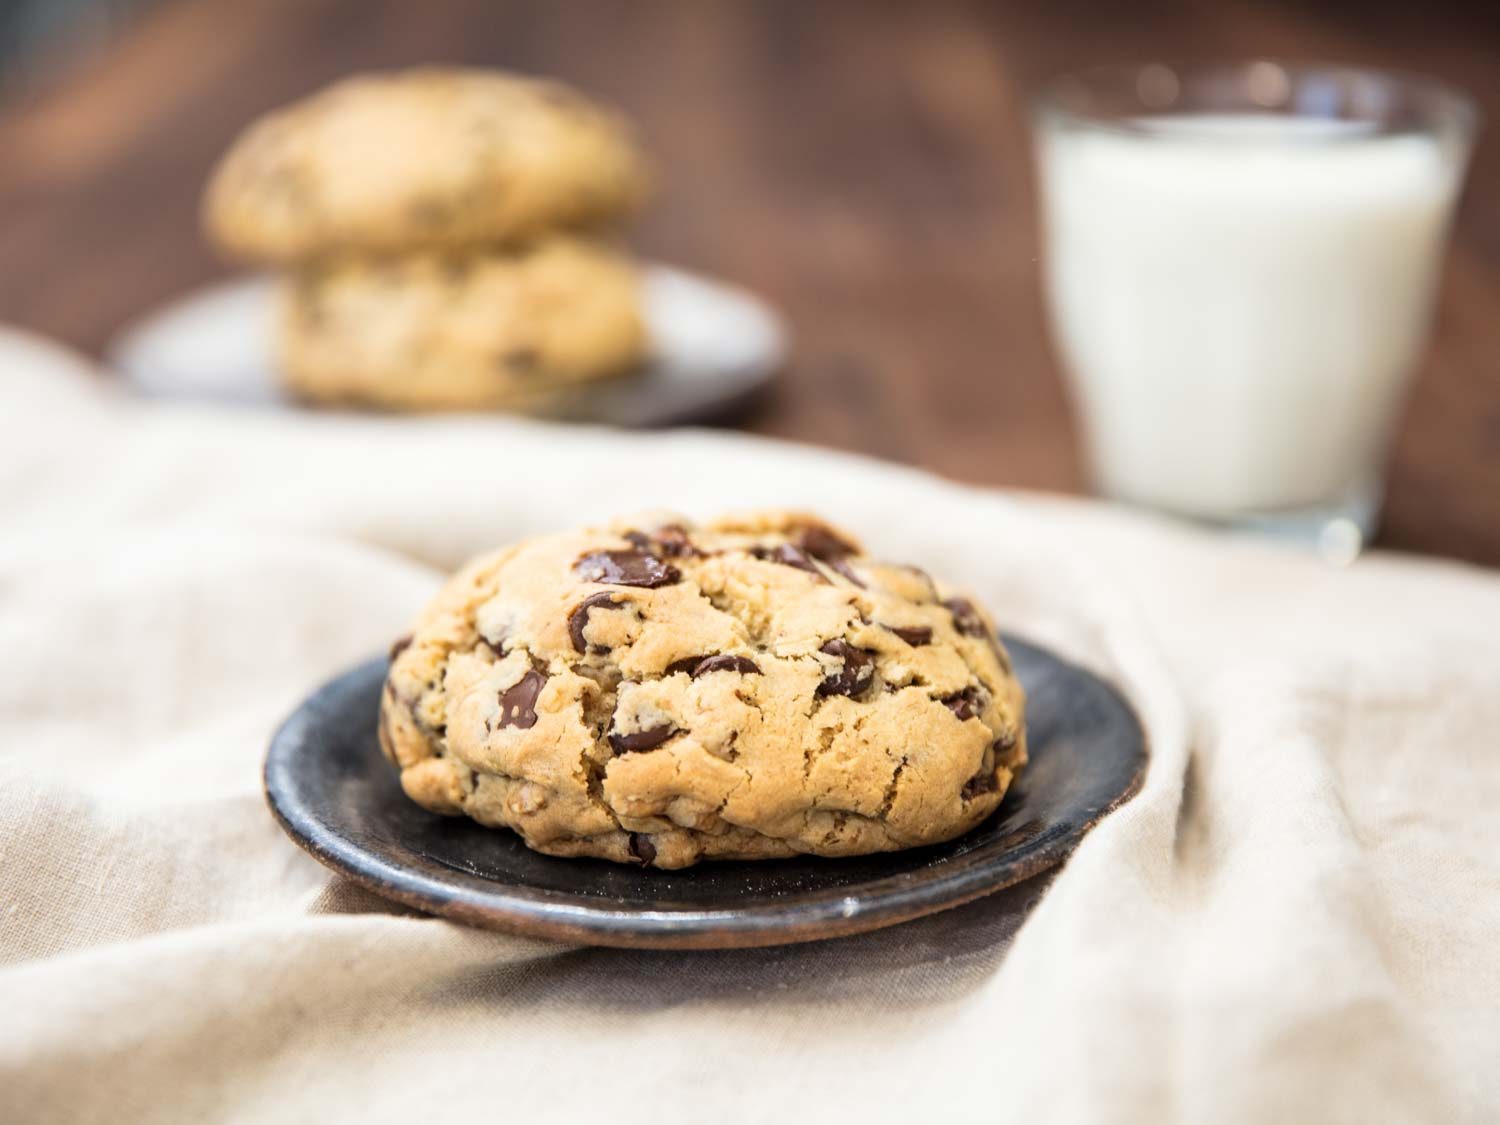 Super-Thick Chocolate Chip Cookies